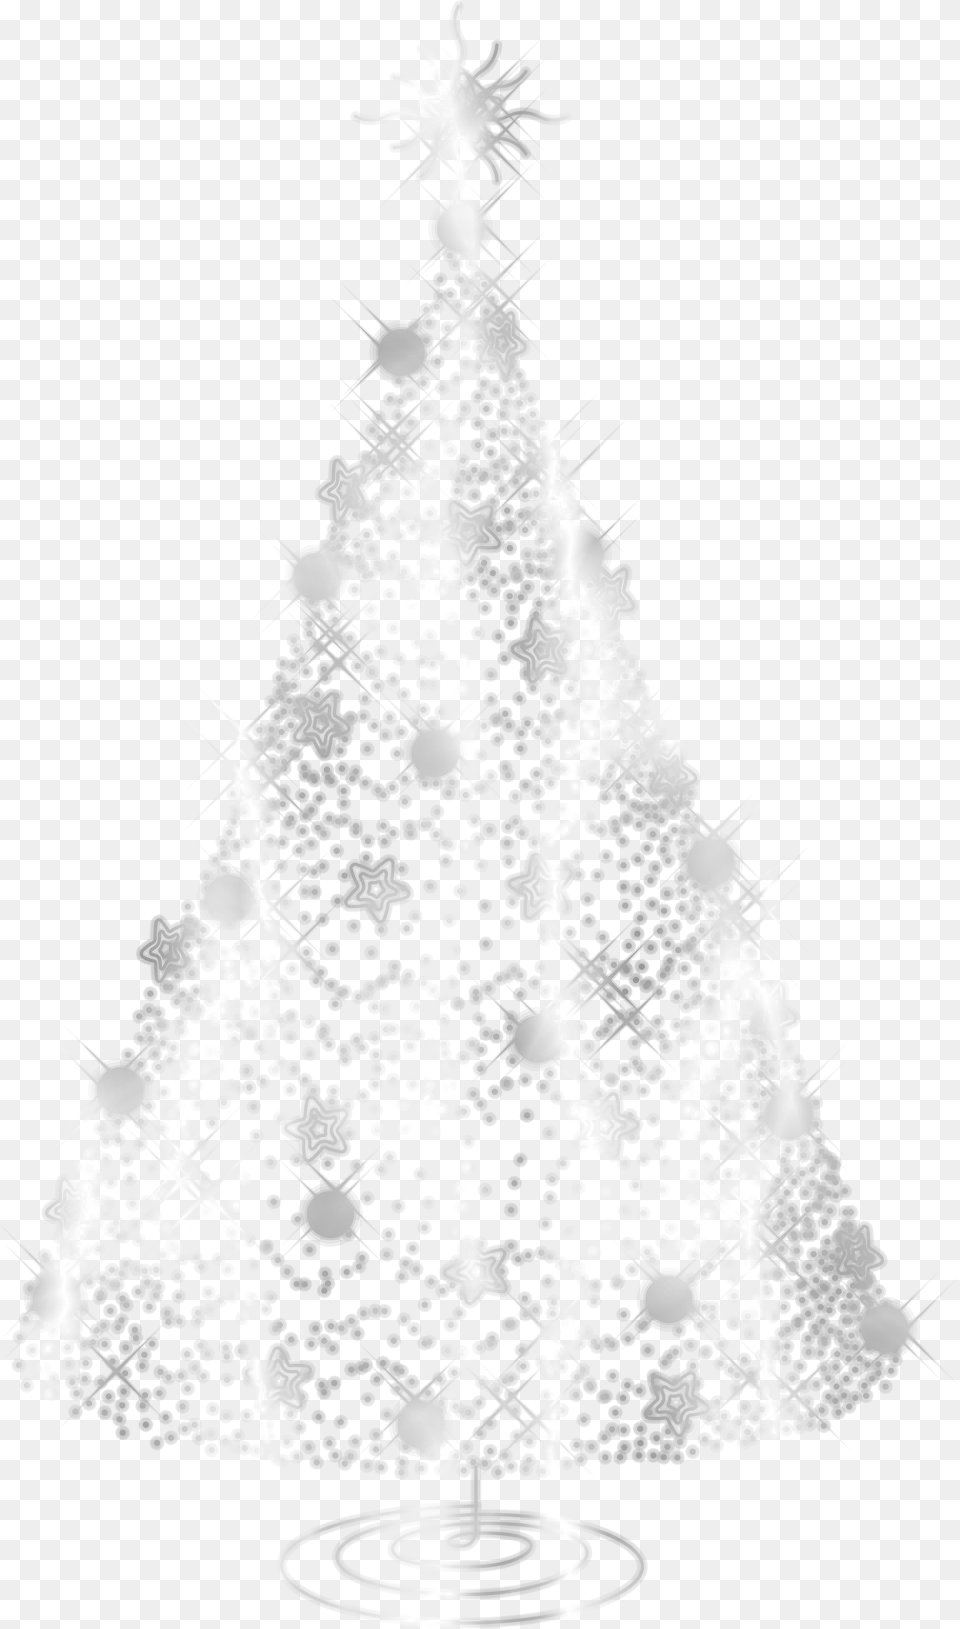 Black And White Christmas Ornament Clip Art Black And Glittering Of Christmas, Chandelier, Lamp, Christmas Decorations, Festival Png Image